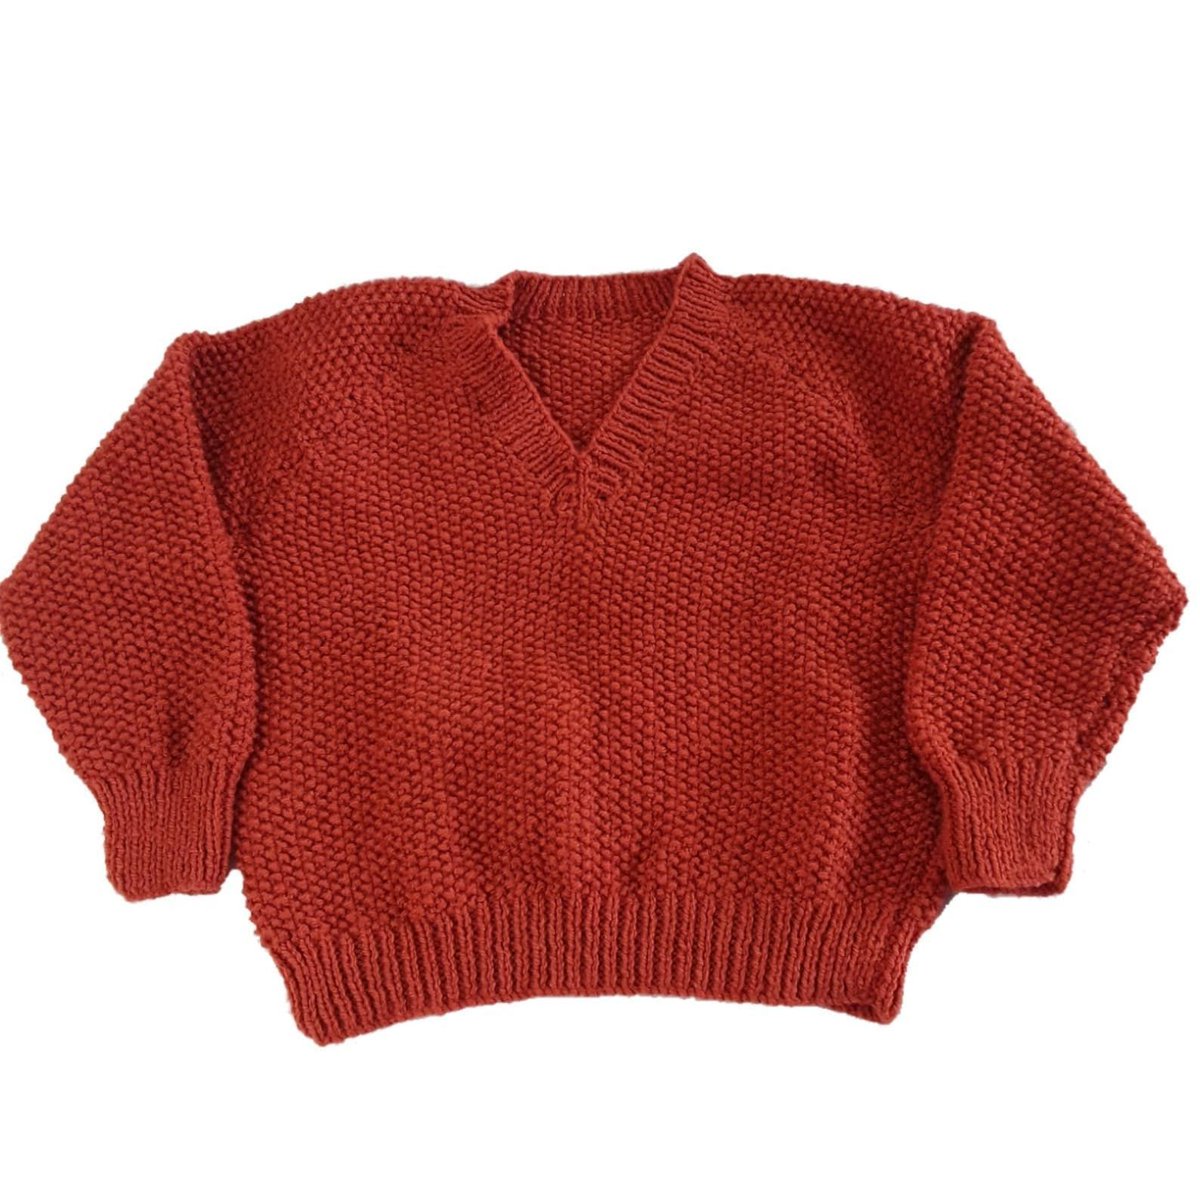 Keep your child comfy and stylish in this hand-knitted fox brown jumper! It's the perfect addition to any tiny wardrobe. Shop now on #Etsy: knittingtopia.etsy.com/listing/168363… #Knittingtopia #ChildrensKnitwear #craftbizparty #MHHSBD